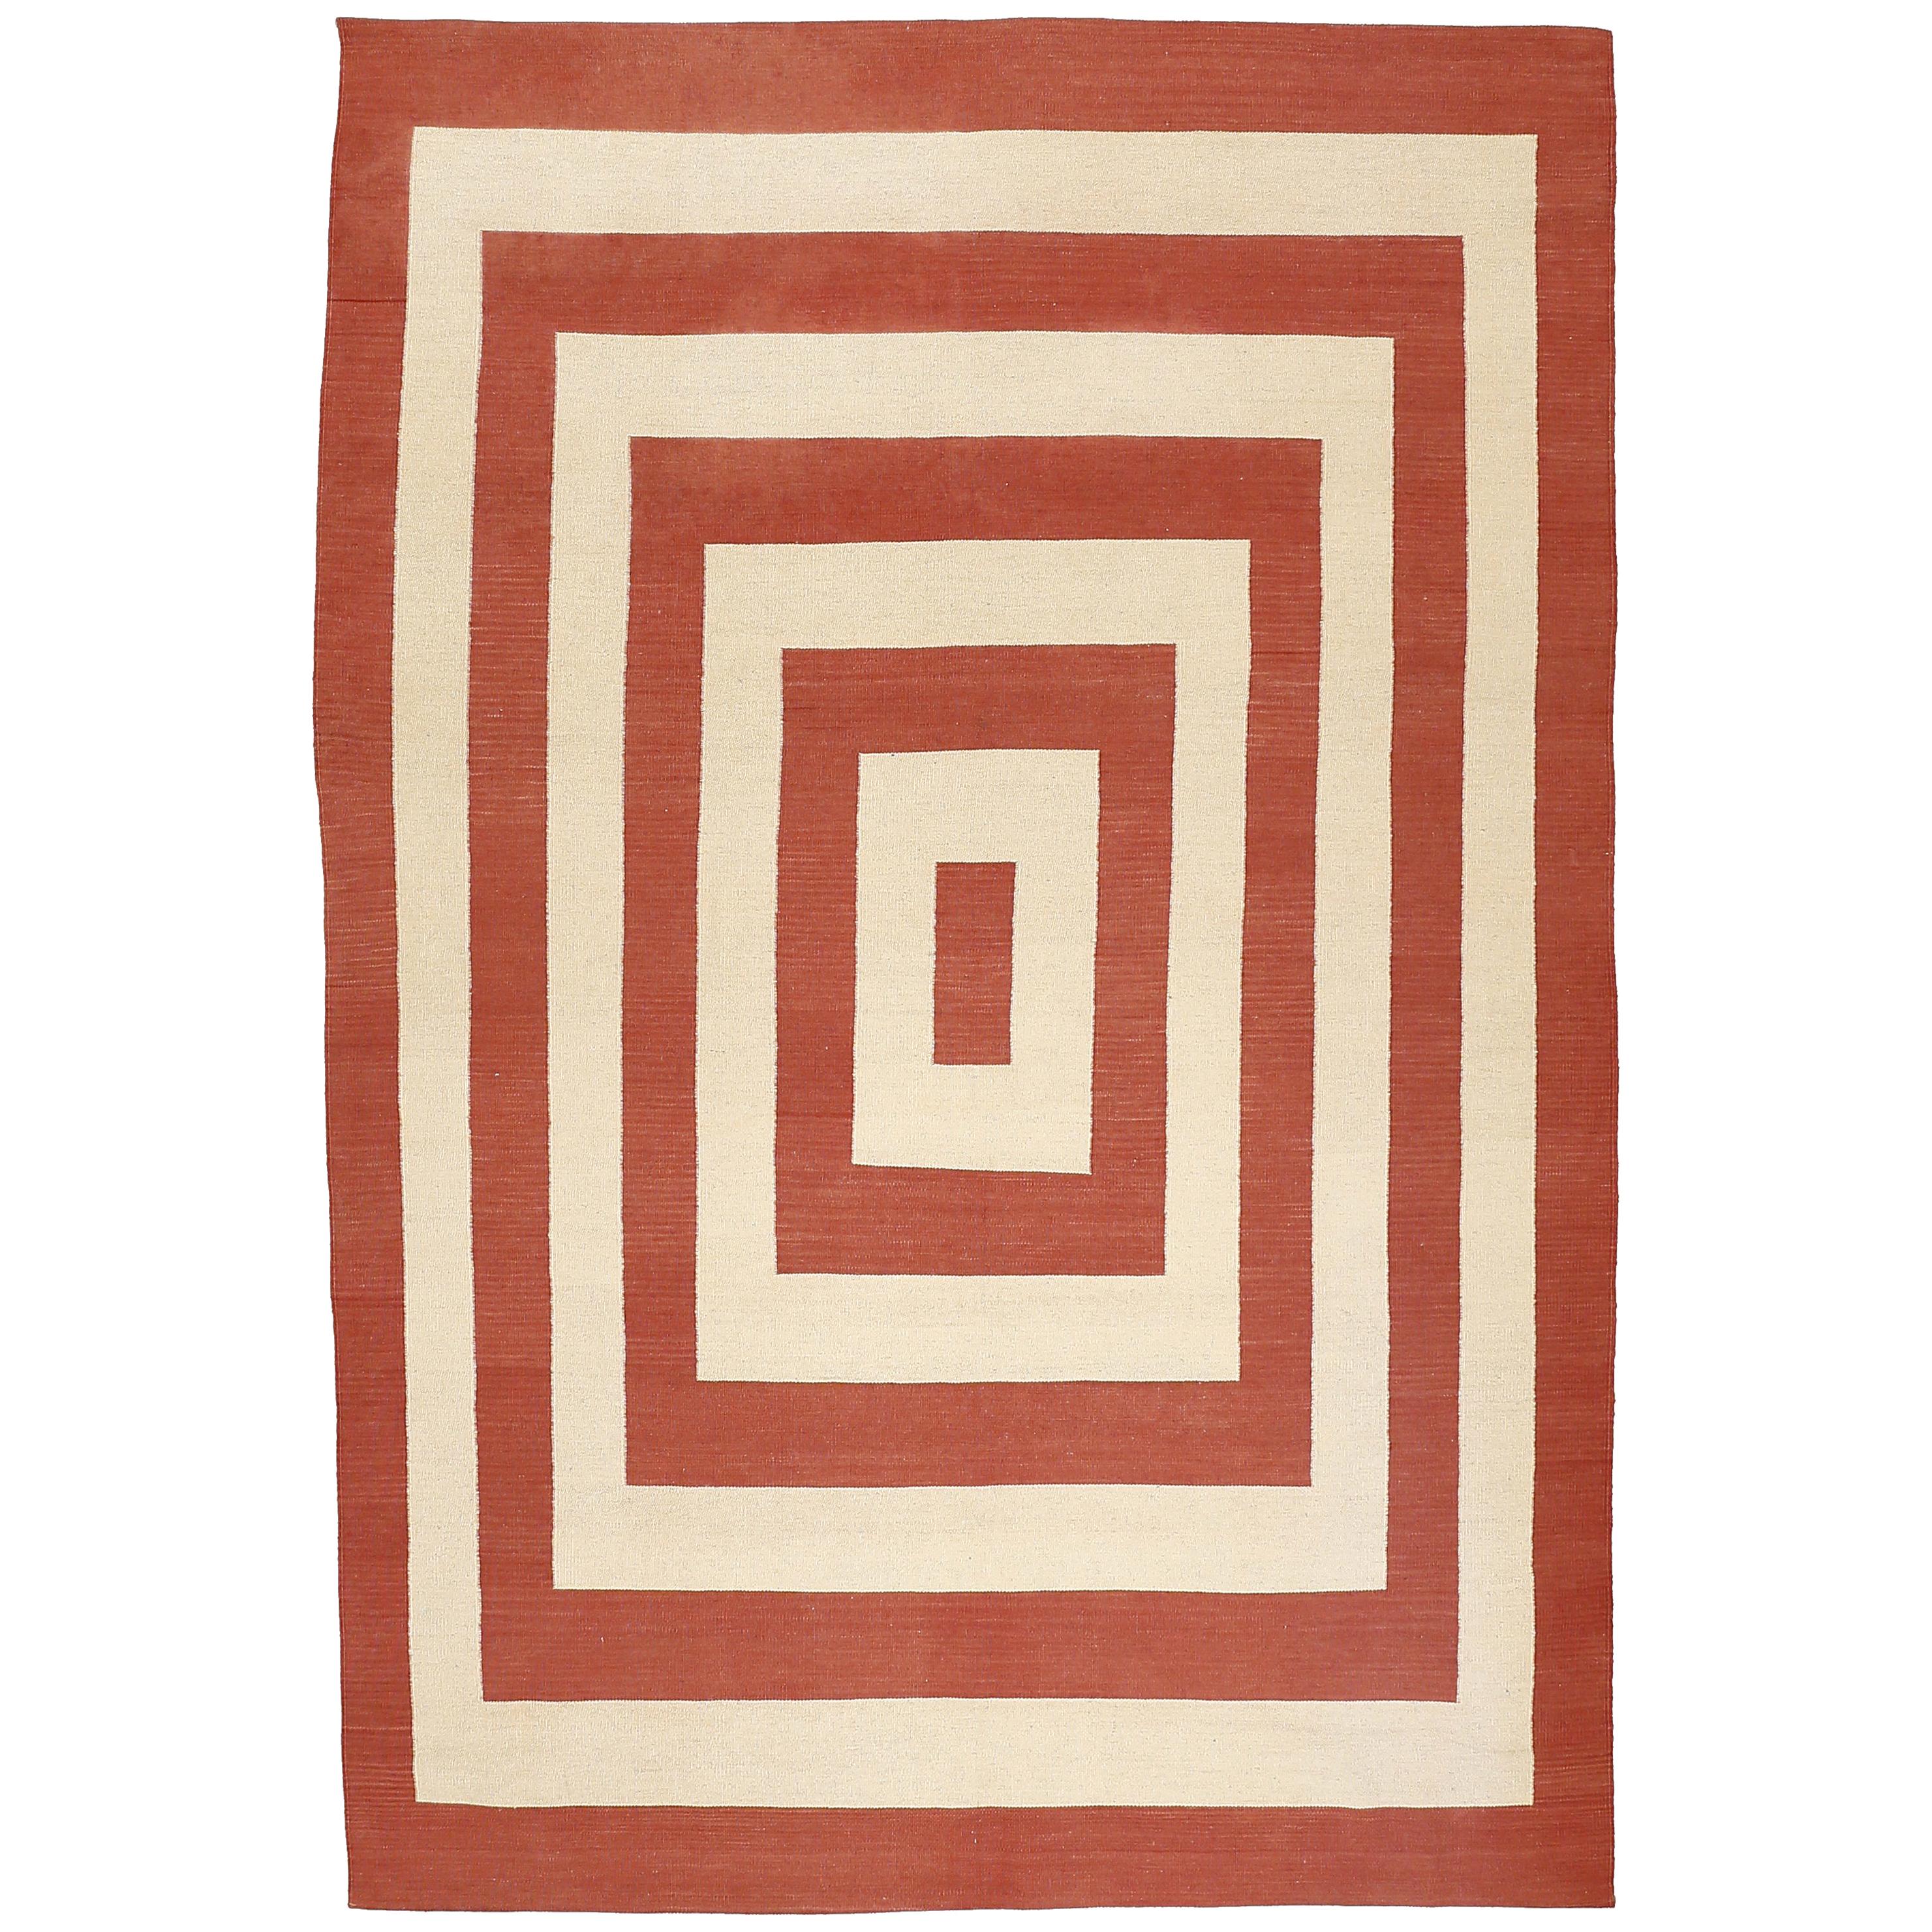 Modernist Design Kilim Rug with Concentric Red Rectangles on an Ivory Background